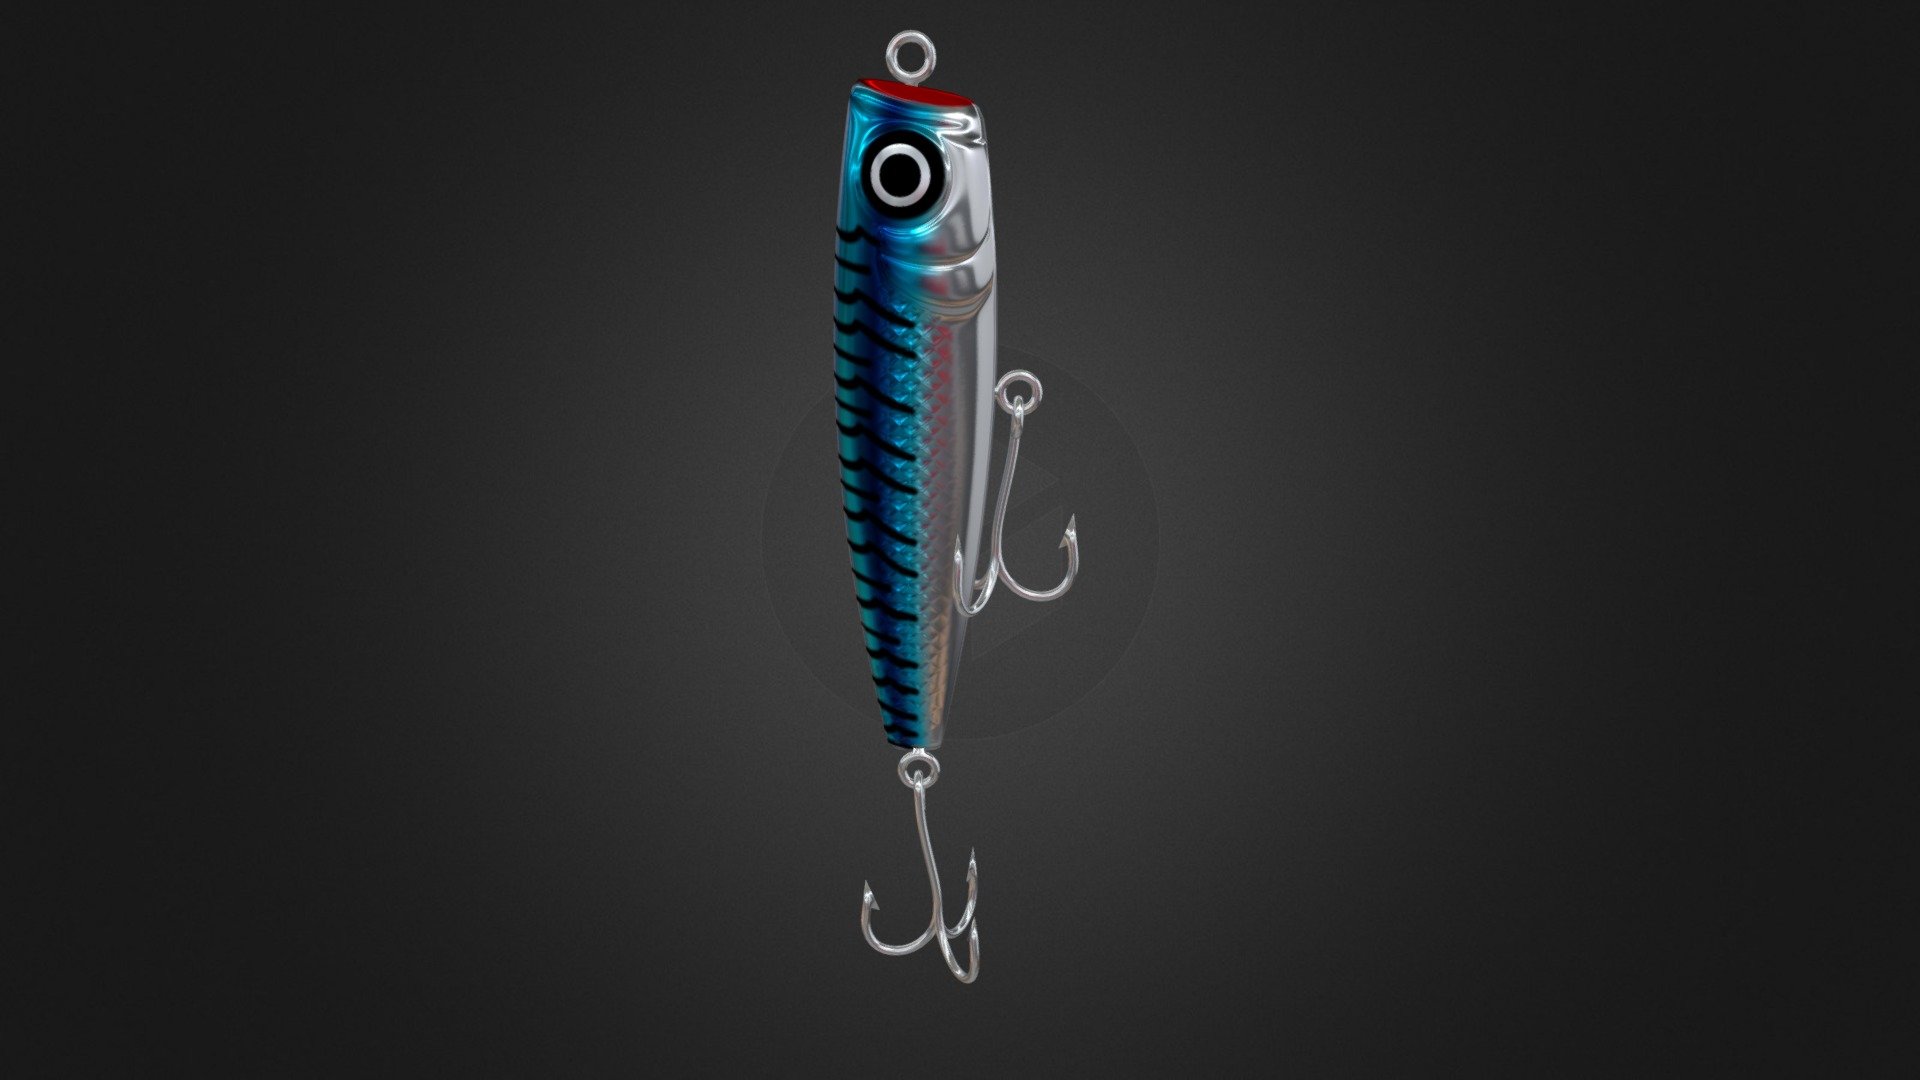 Low-poly 3D model of Fishing Lure.
Can be used in fishing games.
Created in Blender 2.9, rendered in eevee.

PBR textures included:
Base color - 2048x2048px, png. 
Ambient occlusion - 2048x2048px, png.
Roughness - 2048x2048px, png.
Metallic - 2048x2048px, png.
Normal - 2048x2048px, png.
Height - 2048x2048px, png 3d model